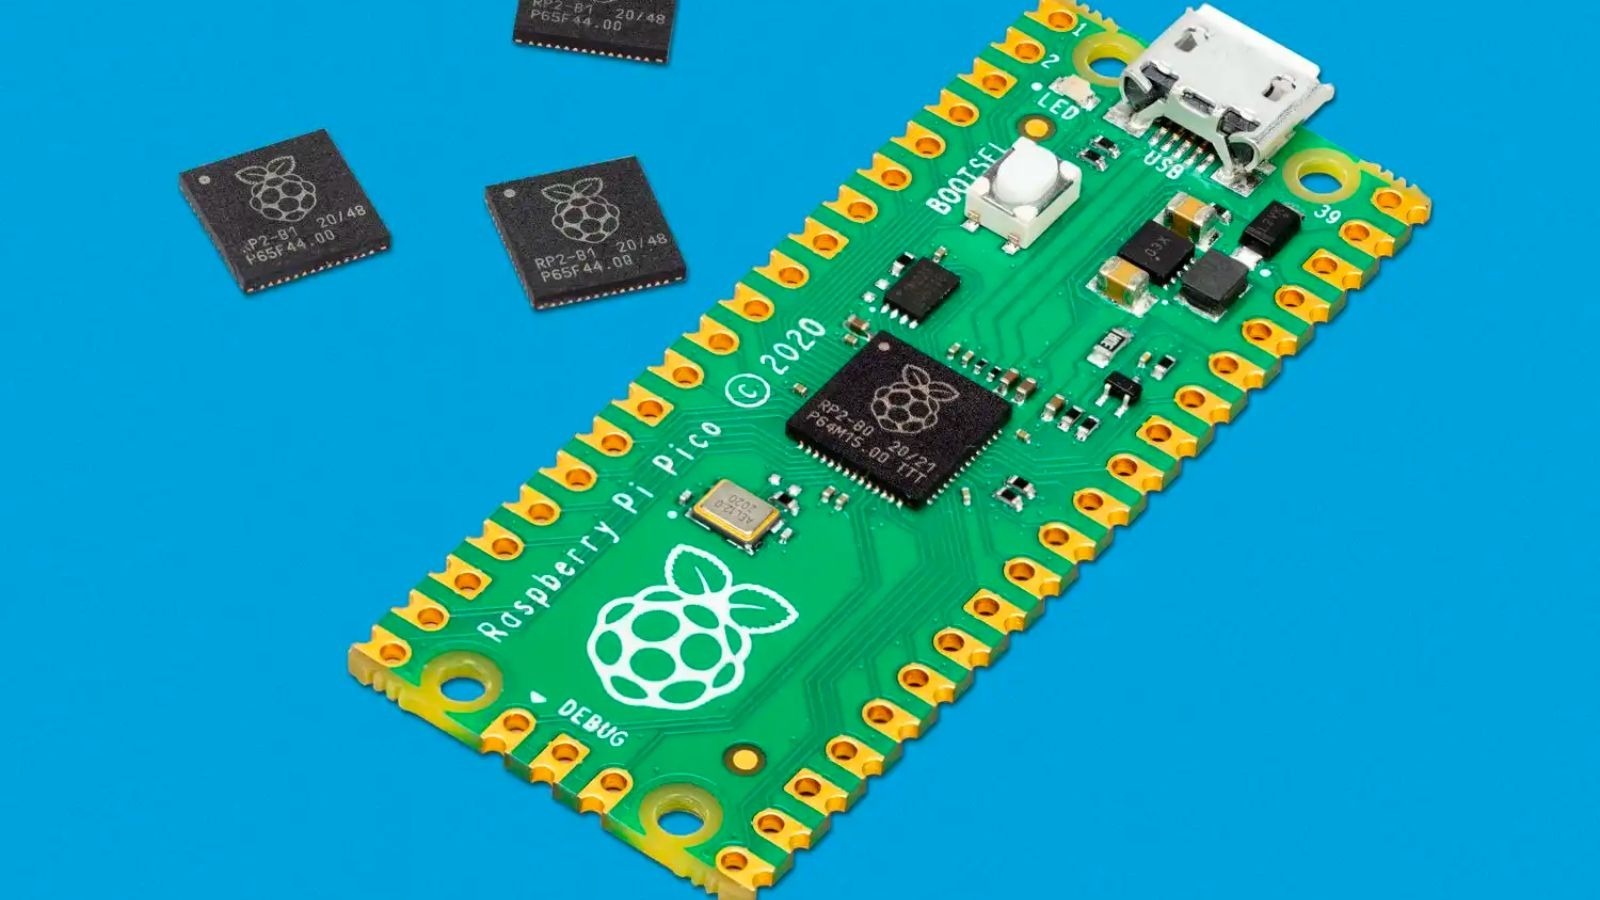 The Raspberry Pi Zero 2 W is Ideal for DIY Projects